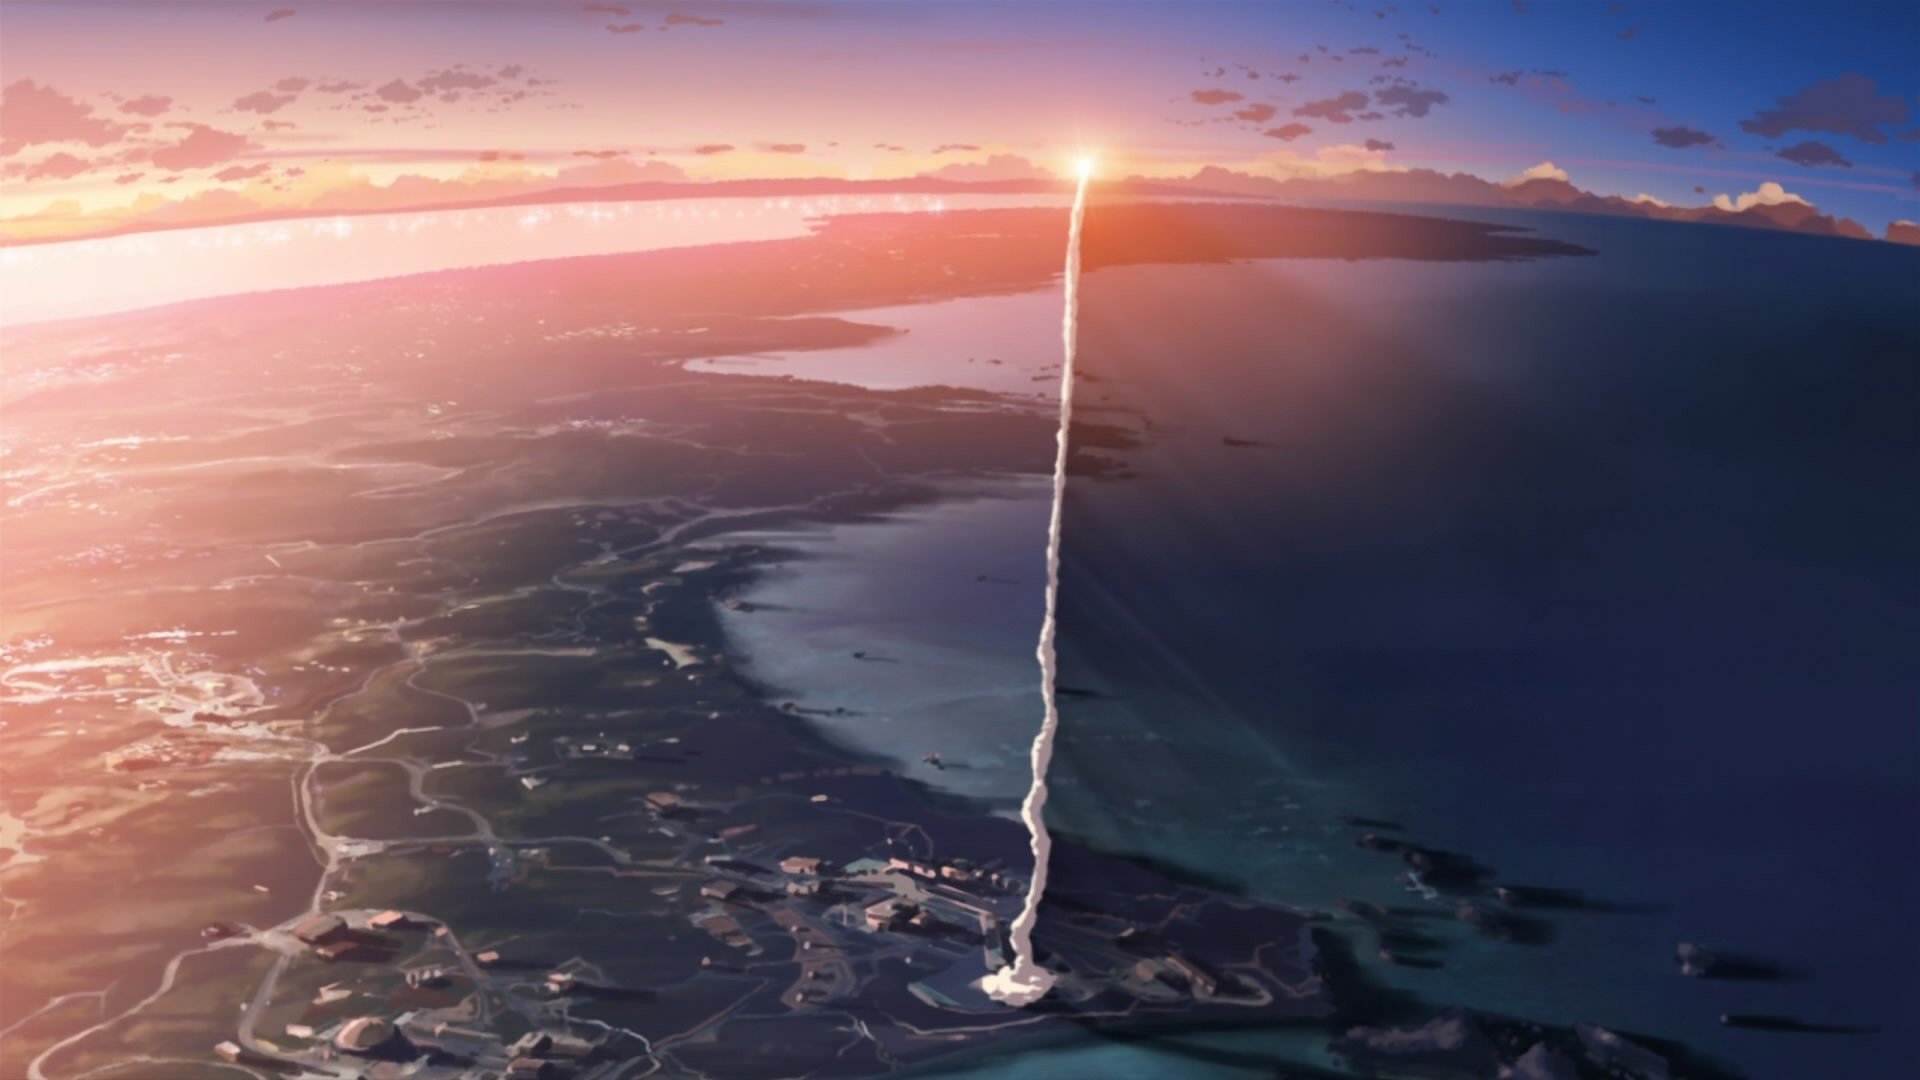 160 5 Centimeters Per Second HD Wallpapers and Backgrounds